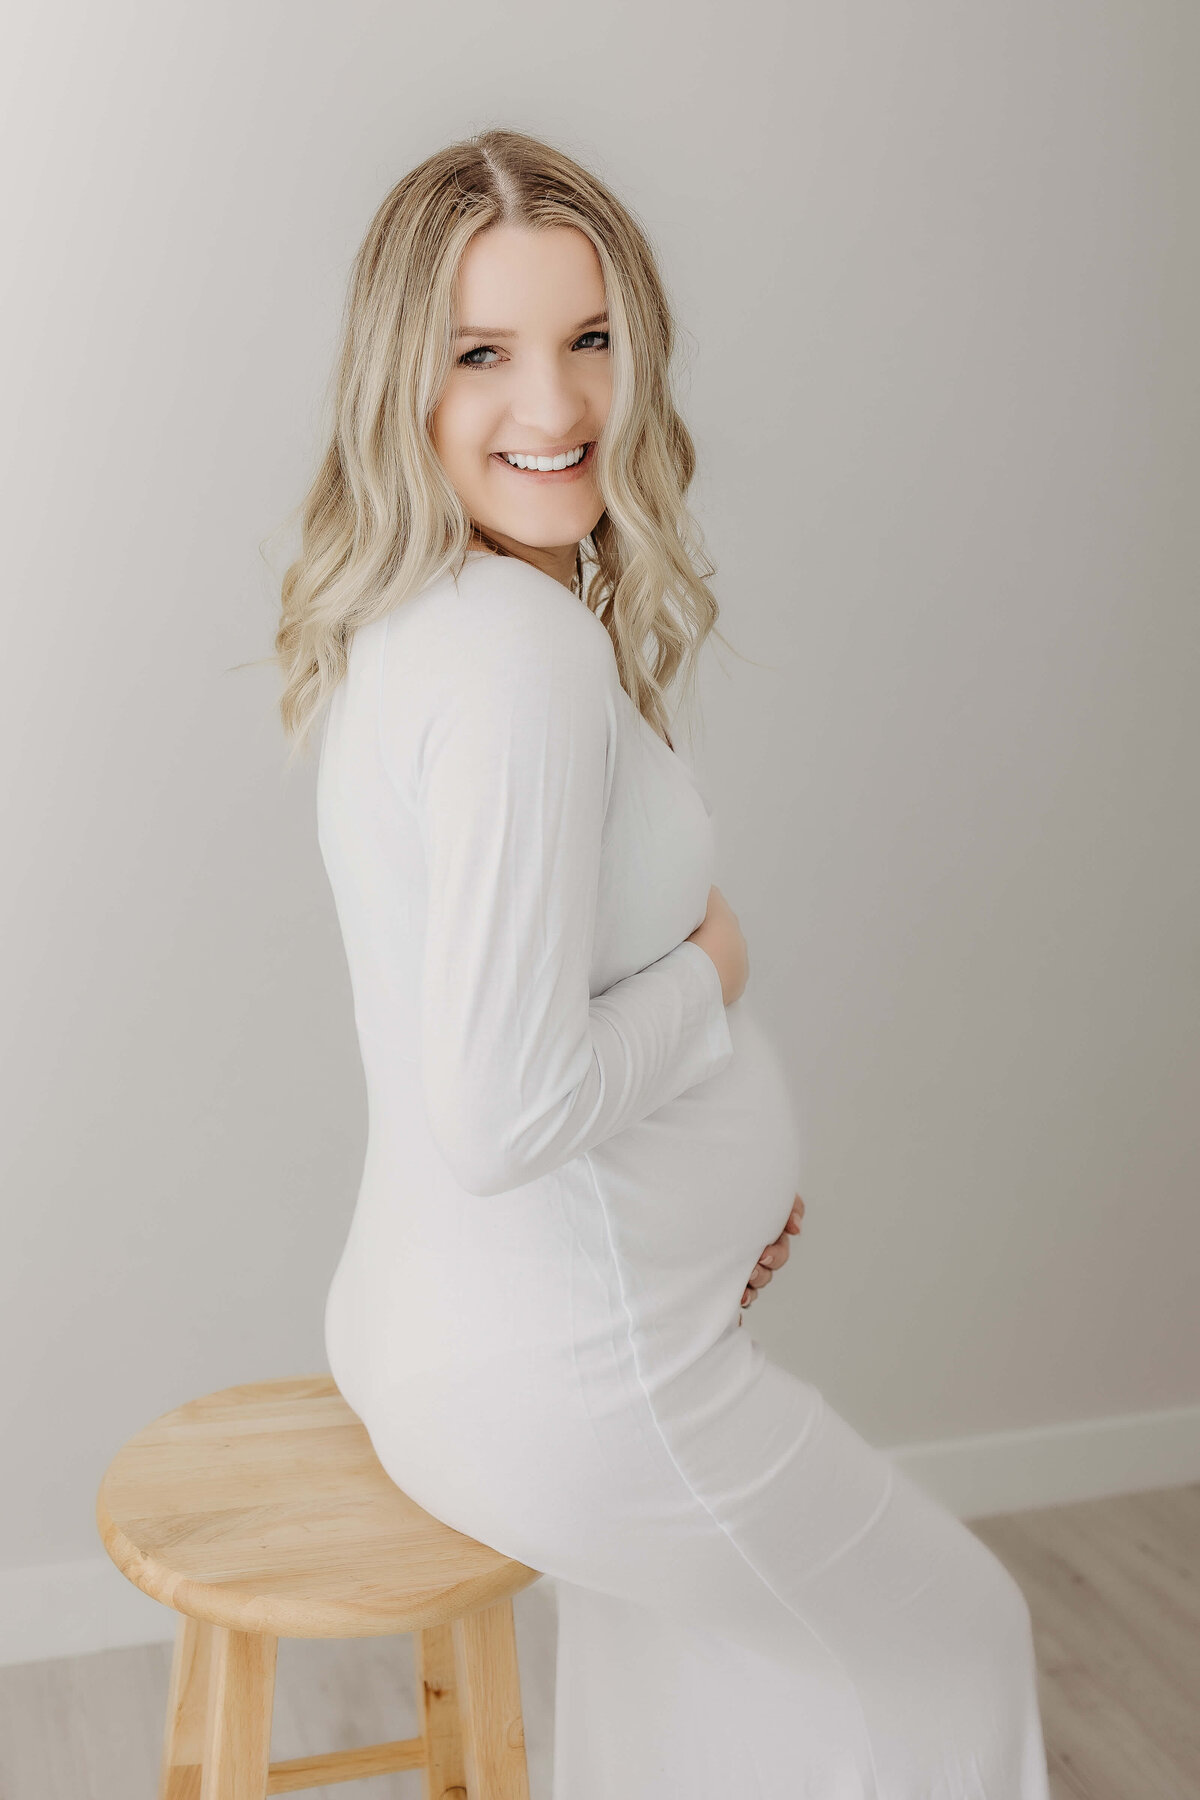 expecting mom in white dress sitting on stool laughing maternity picture luci levon photography eau claire wi